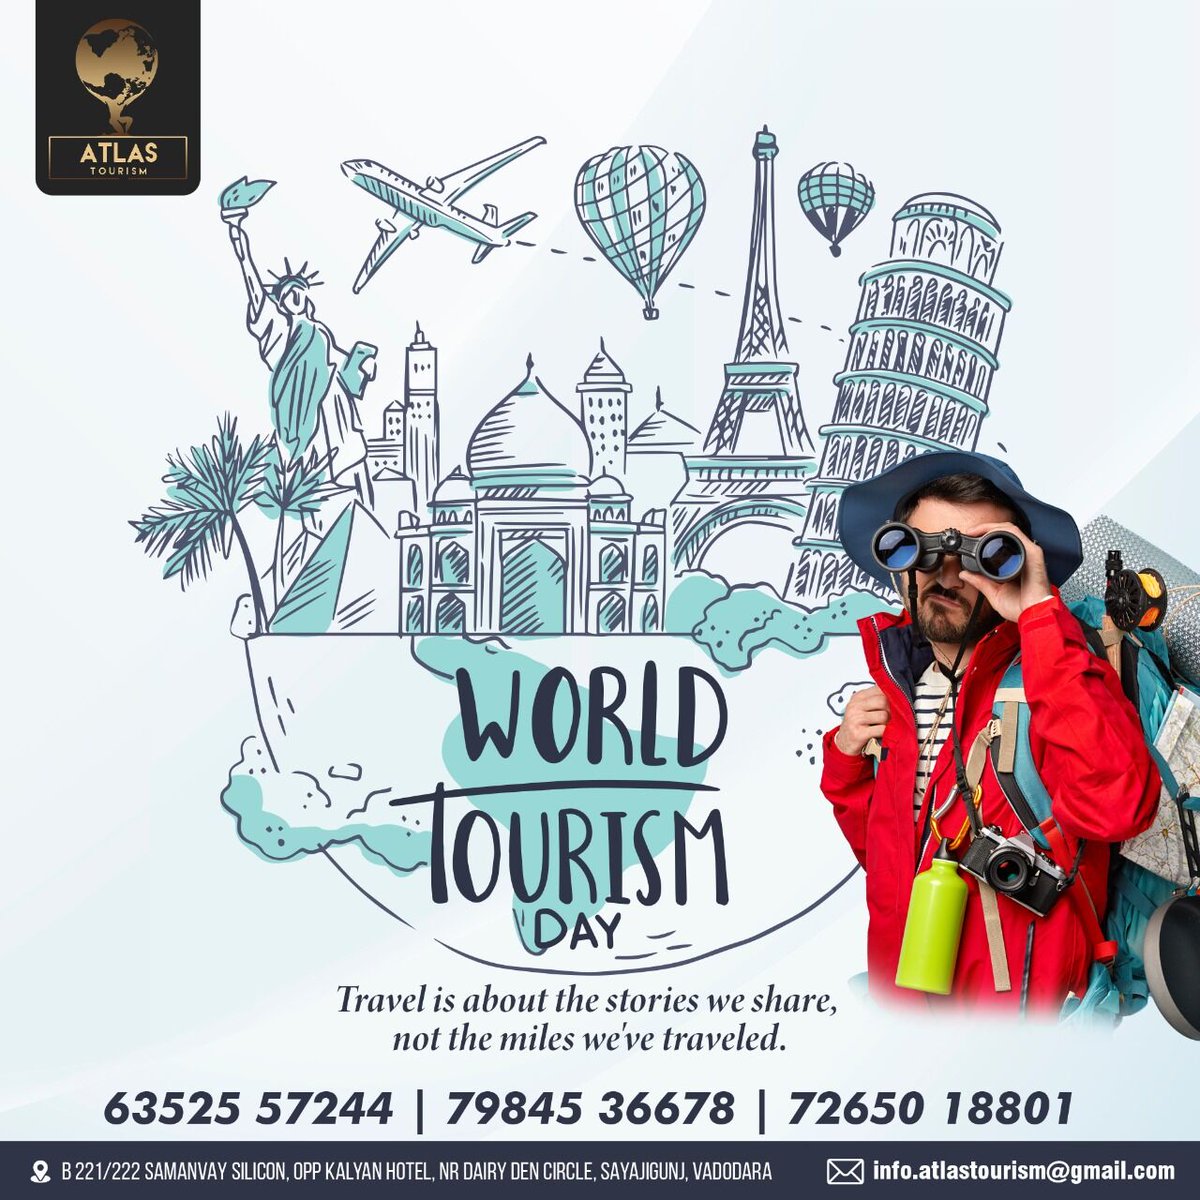 Dear #tourists! Come and create your travel diaries with #AtlasTourism. 

For All Your Tourism Plans Contact Us Today At:
📩 info.atlastourism@gmail.com
📍 B 221/222 SAMANVAY SILICON, OPP KALYAN HOTEL,NR DAIRY DEN CIRCLE, SAYAJIGUNJ, VADODARA

#tourism #worldtourism #traveldiary